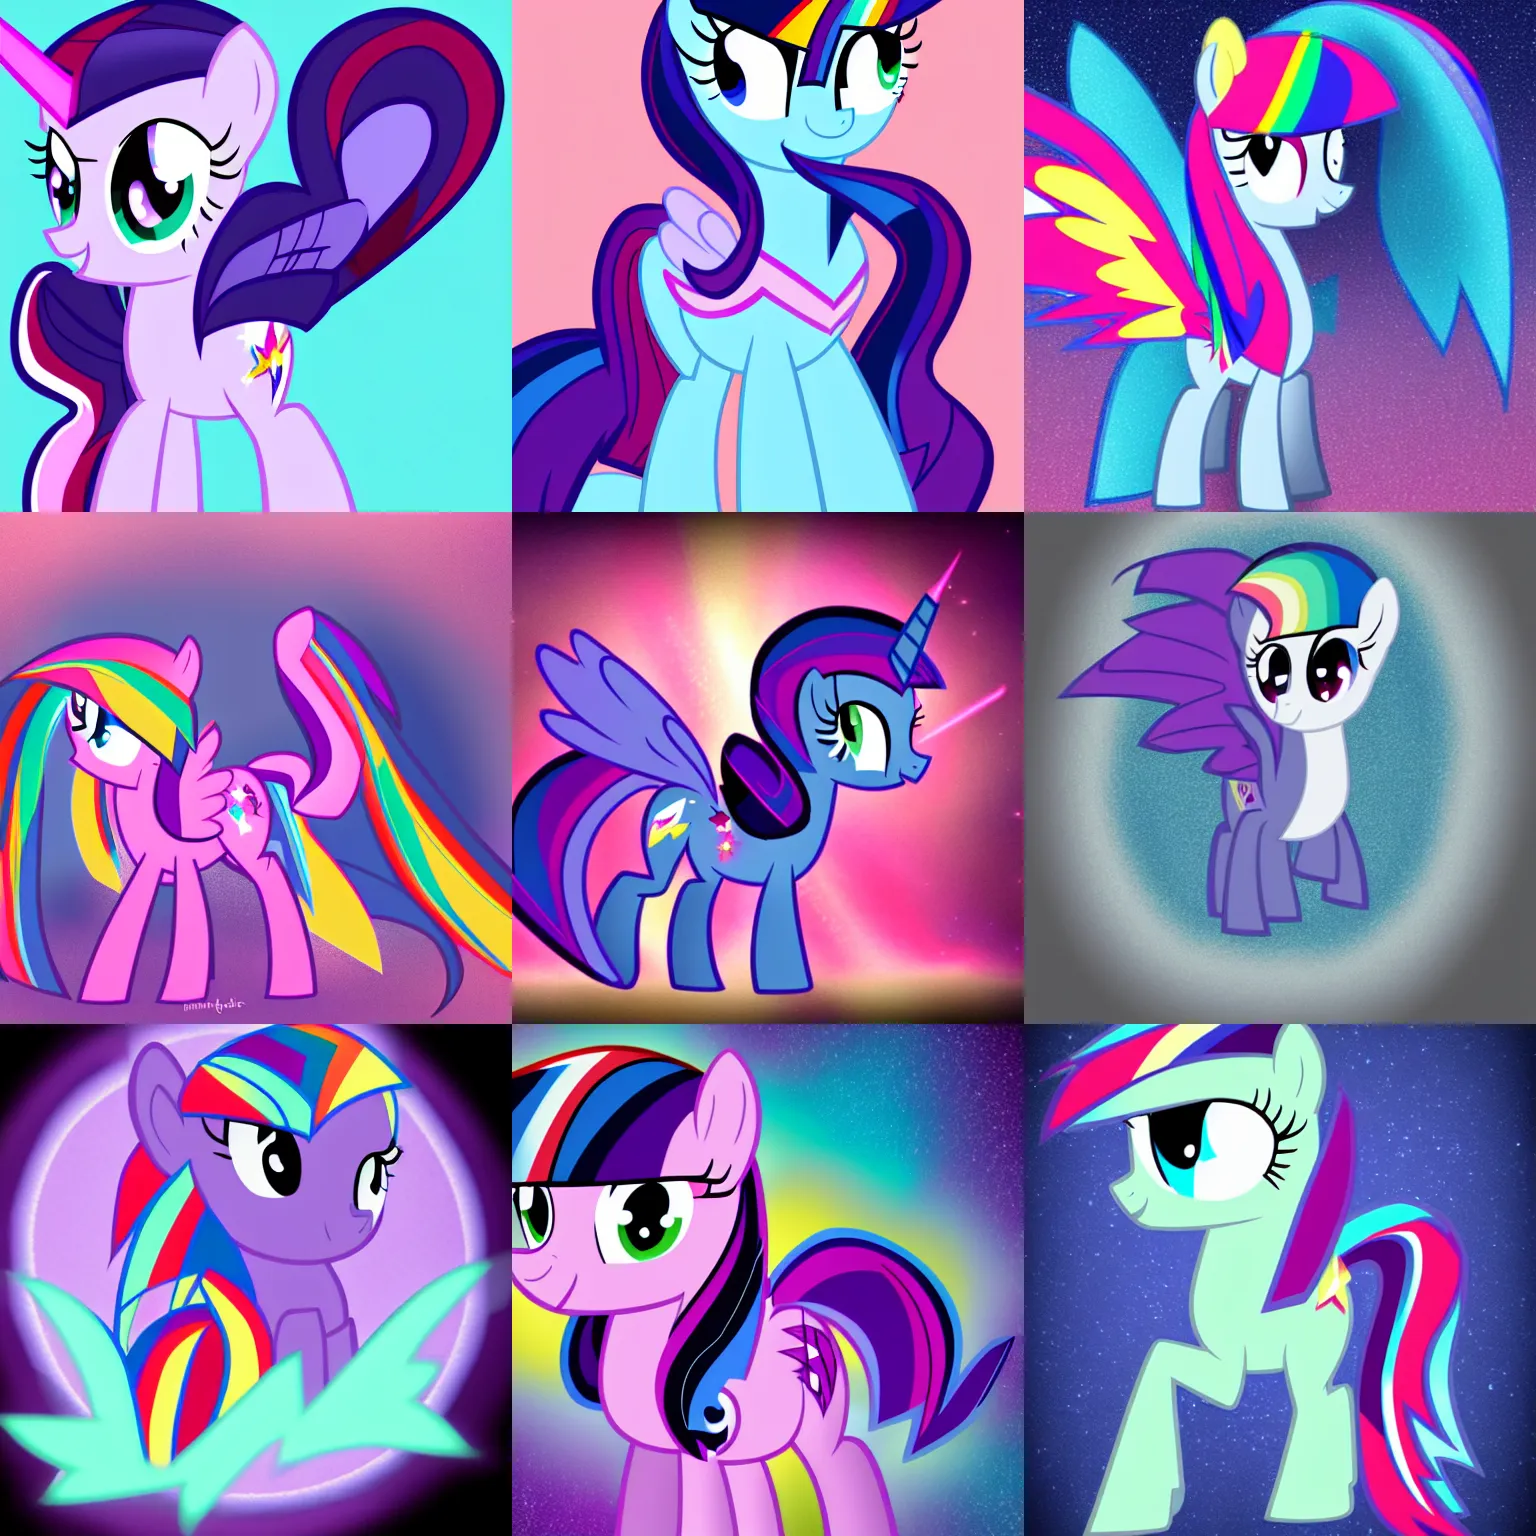 Twilgiht Sparkle from My Little Pony | Stable Diffusion | OpenArt